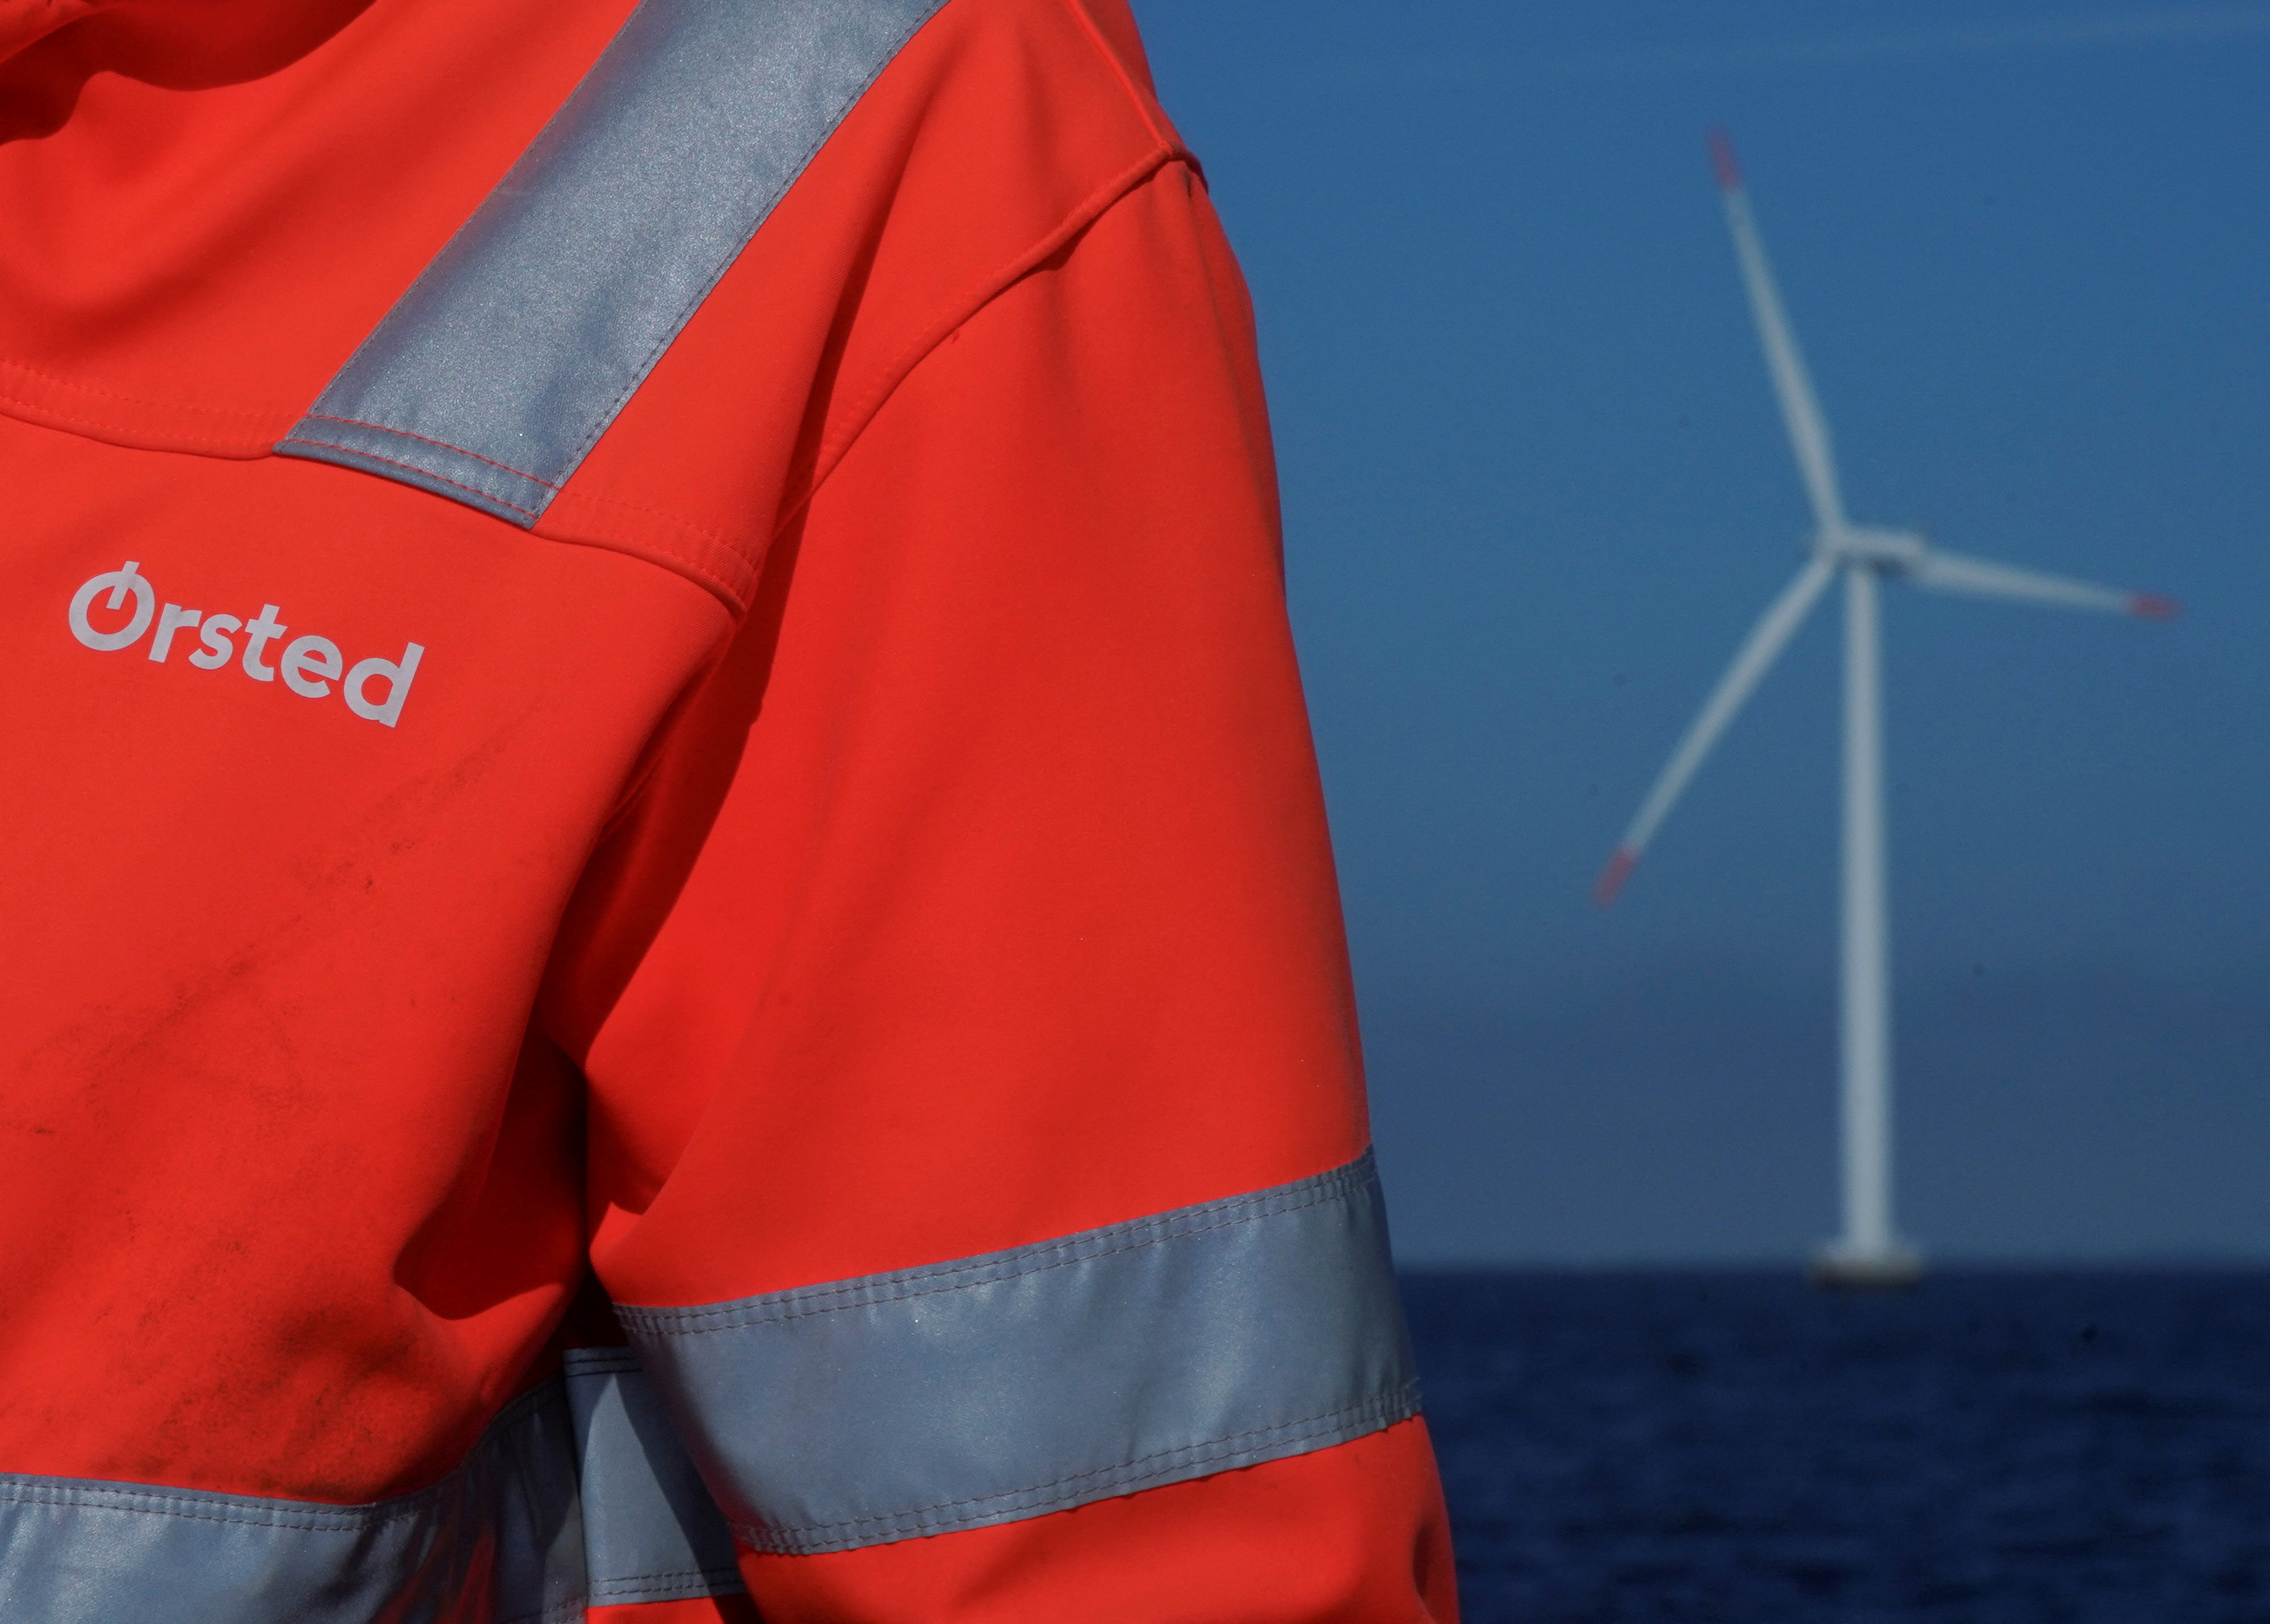 The logo for Orsted can be seen on the jacket worn by an employee at Orsted's offshore wind farm near Nysted